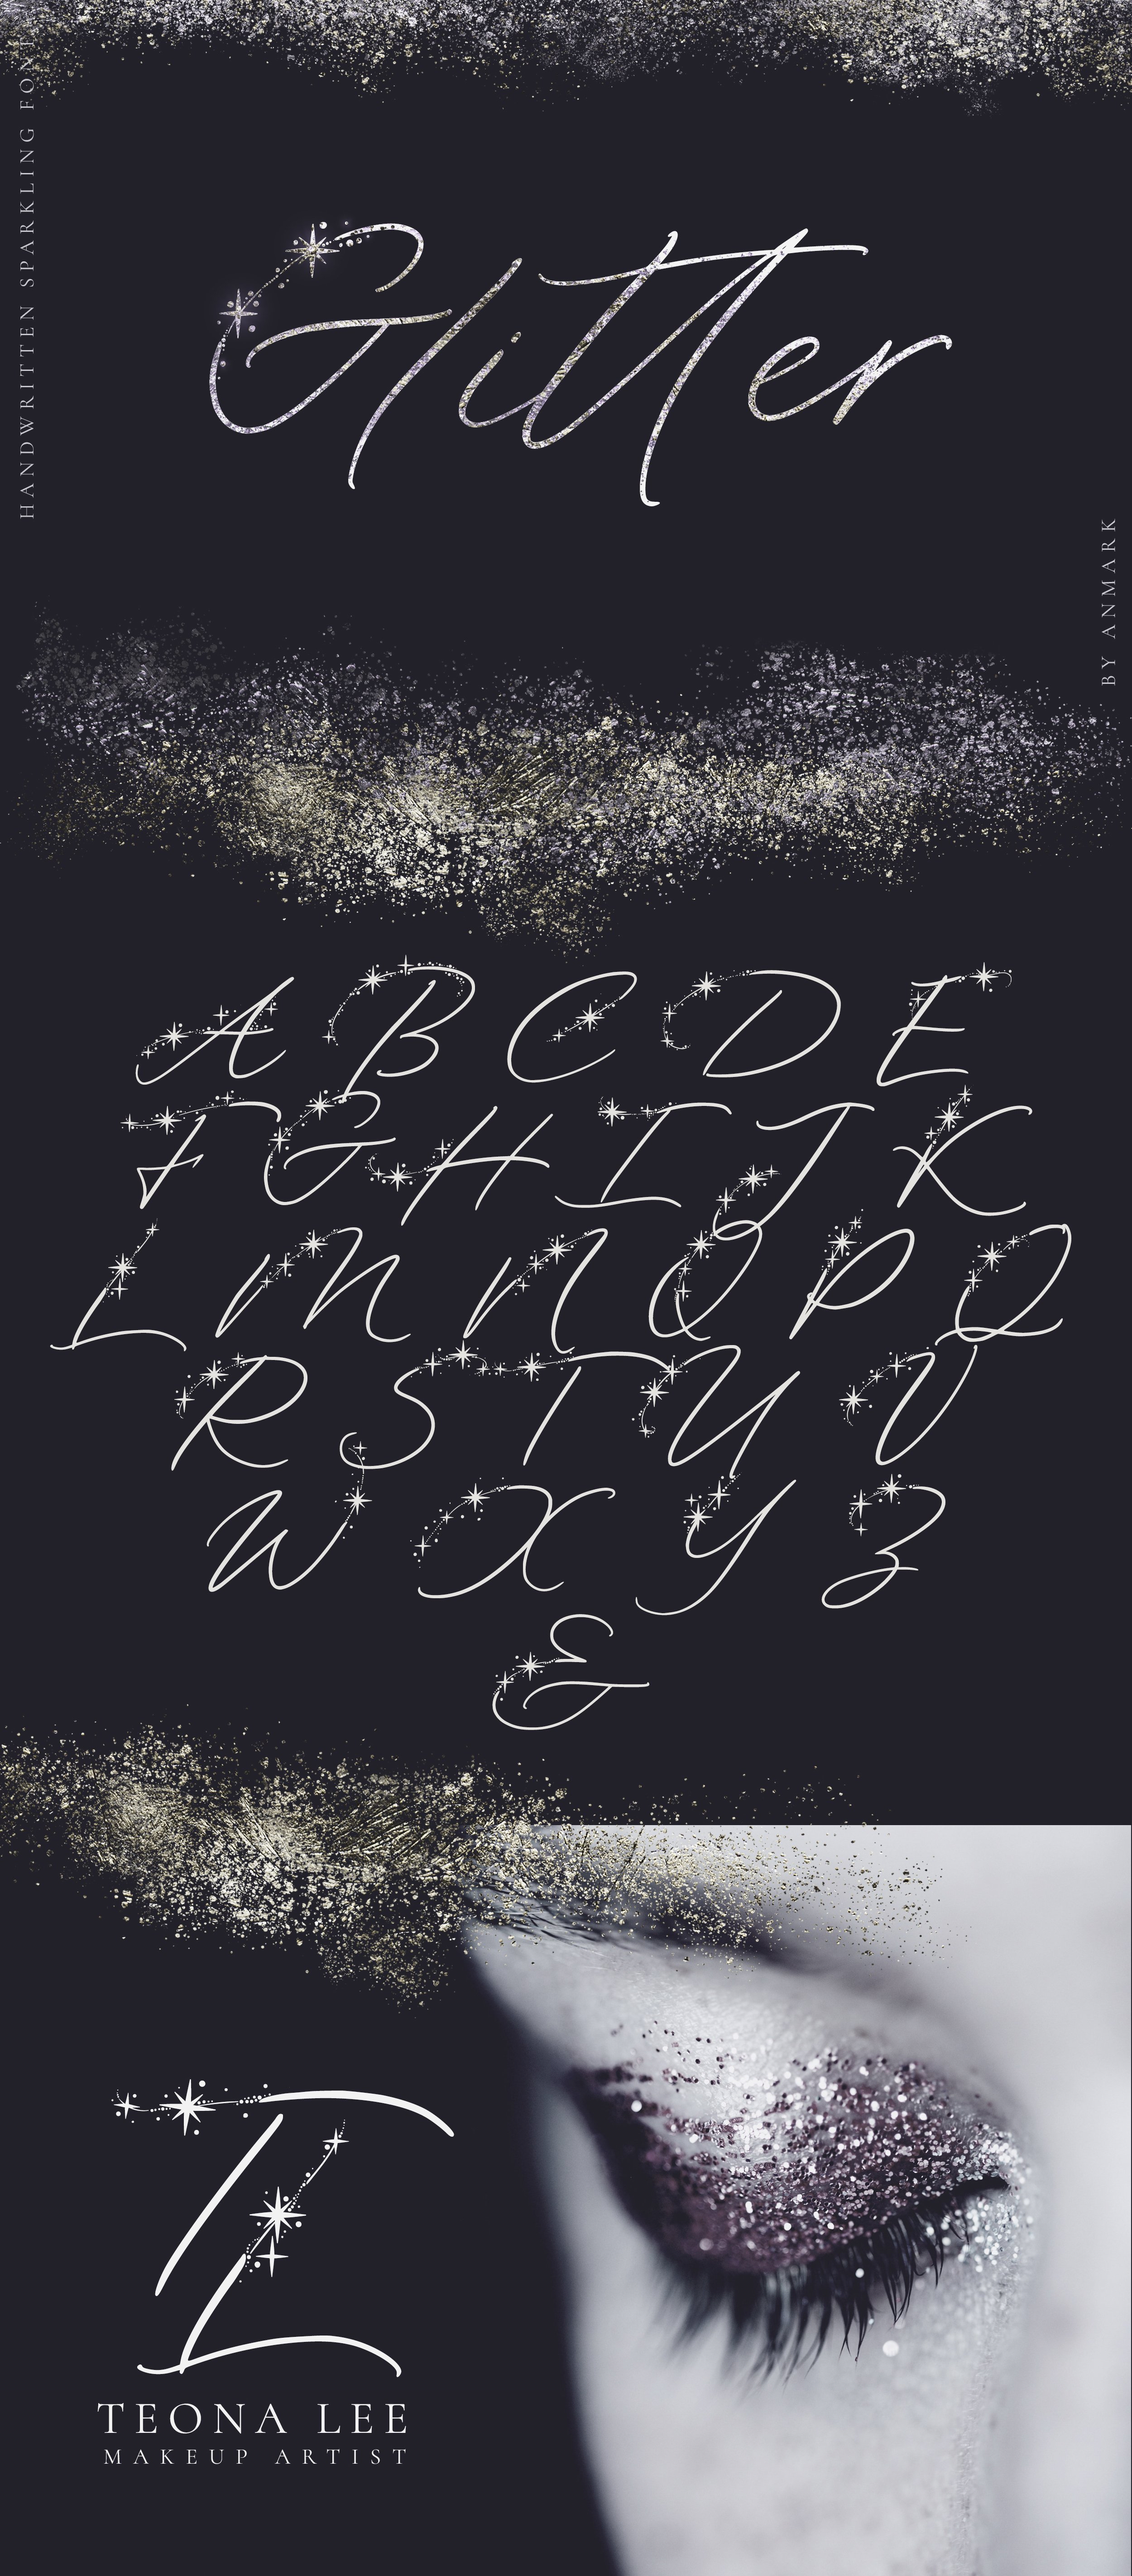 Glitter. Festive font with sparks cover image.